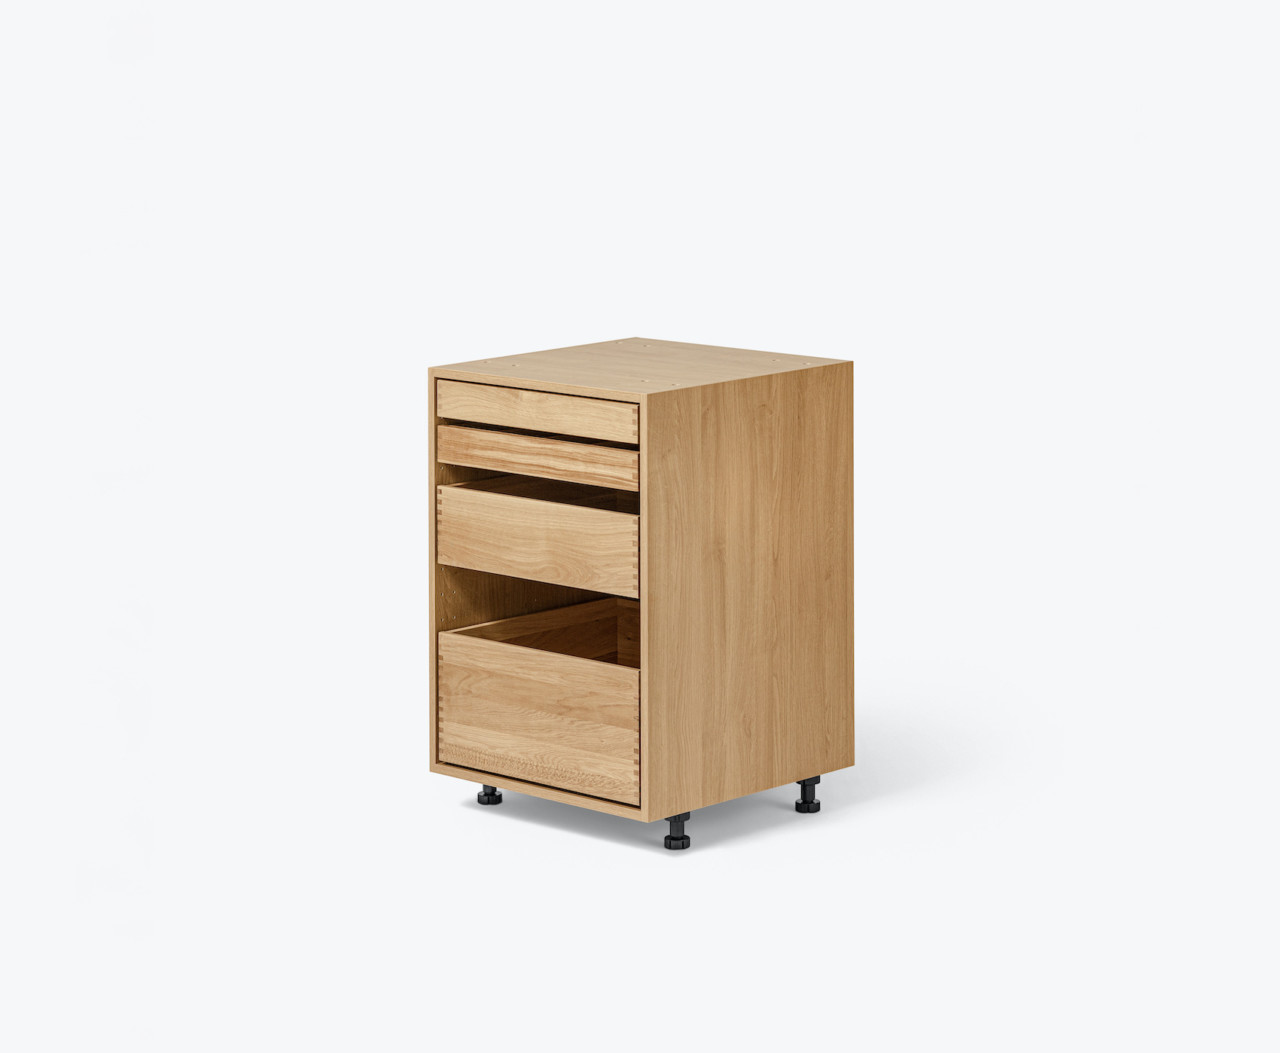 Modular Cabinet System by Reform